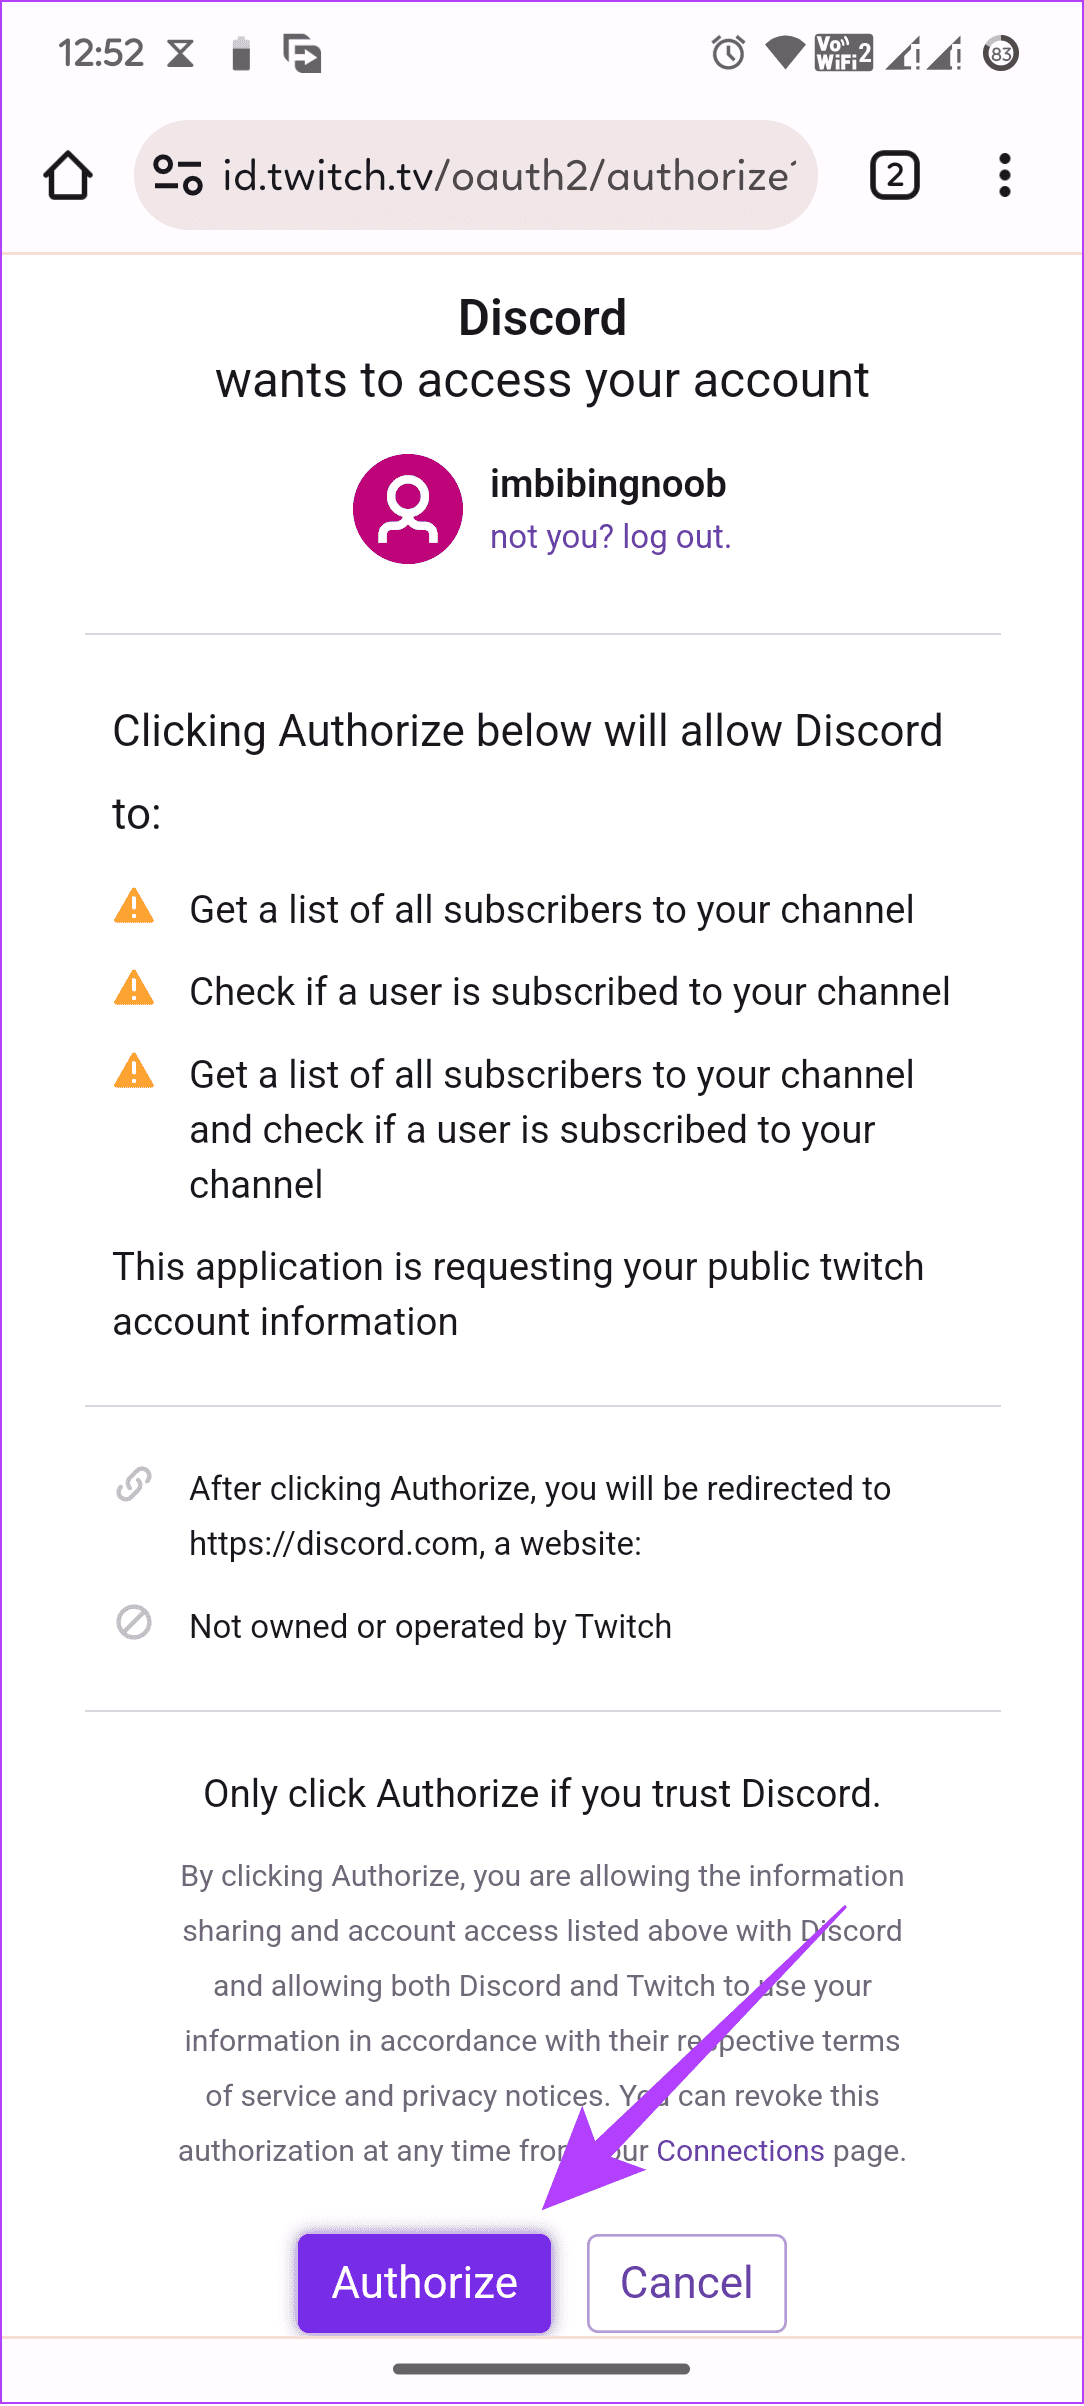 Choose Authorize to confirm 1